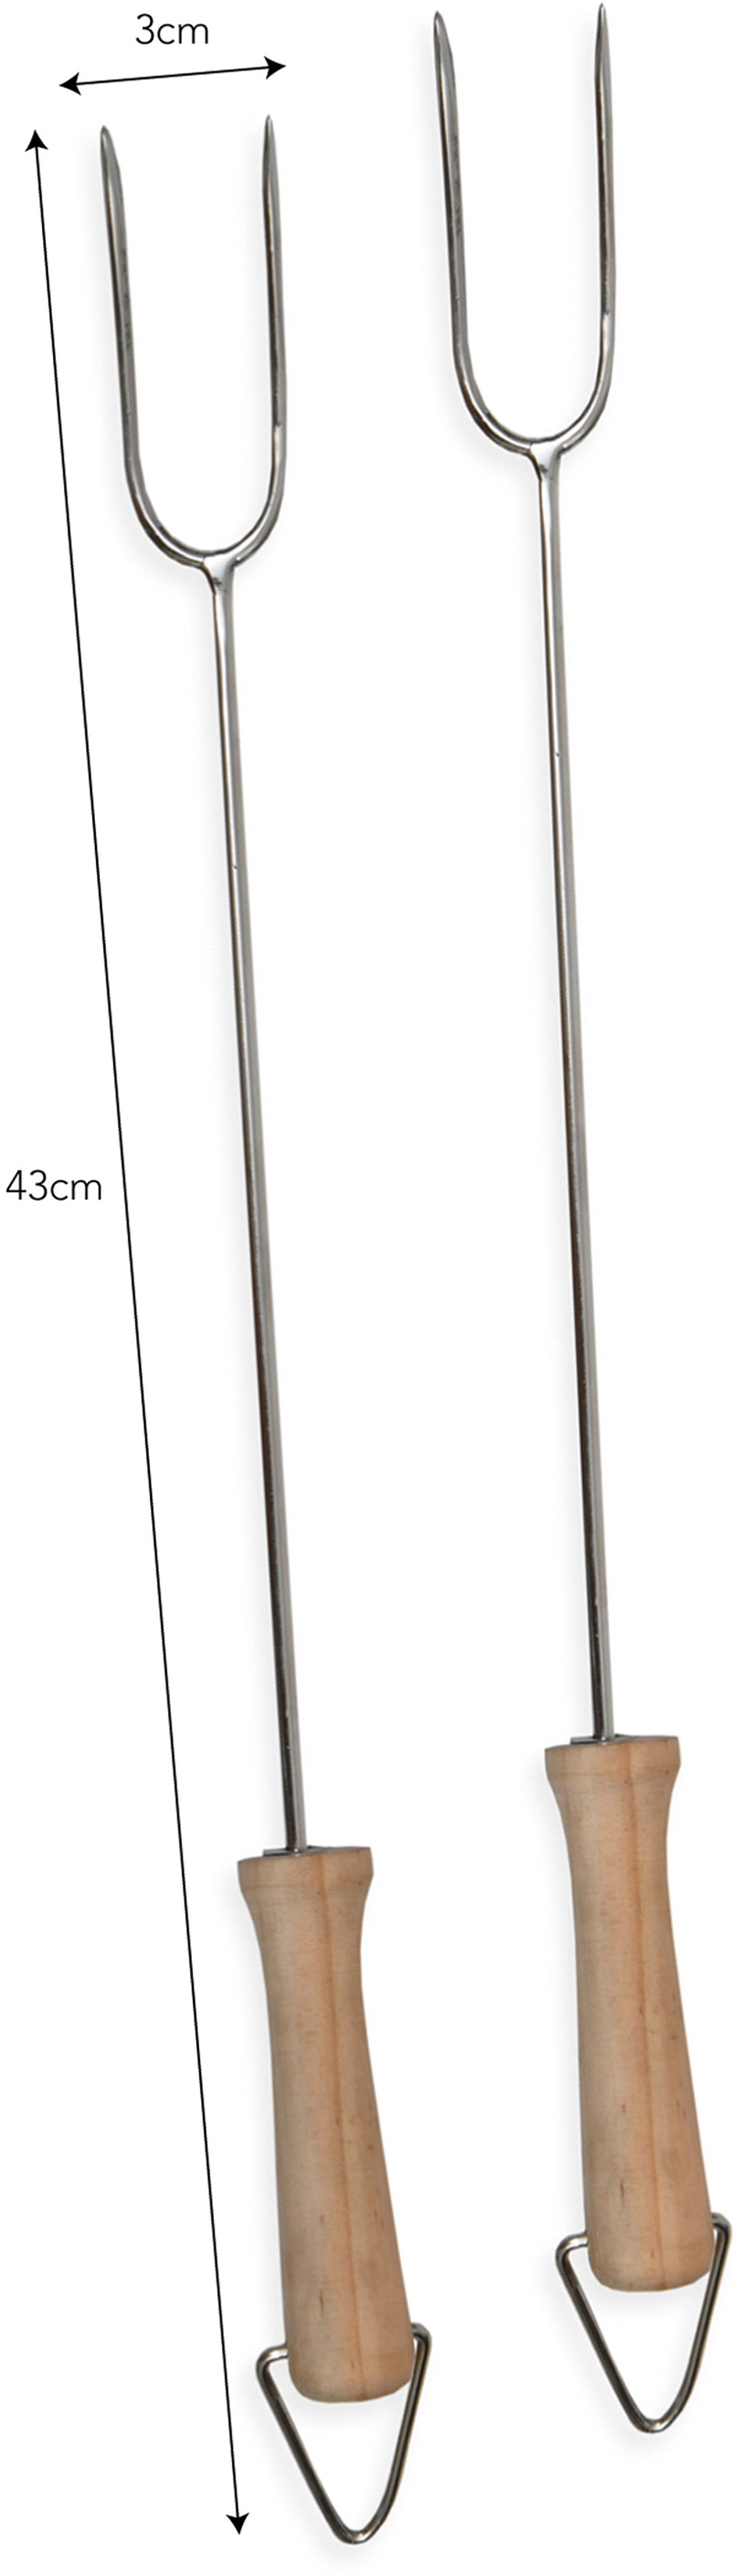 Garden Trading BBQ Forks | Set of 2 dimensions overview